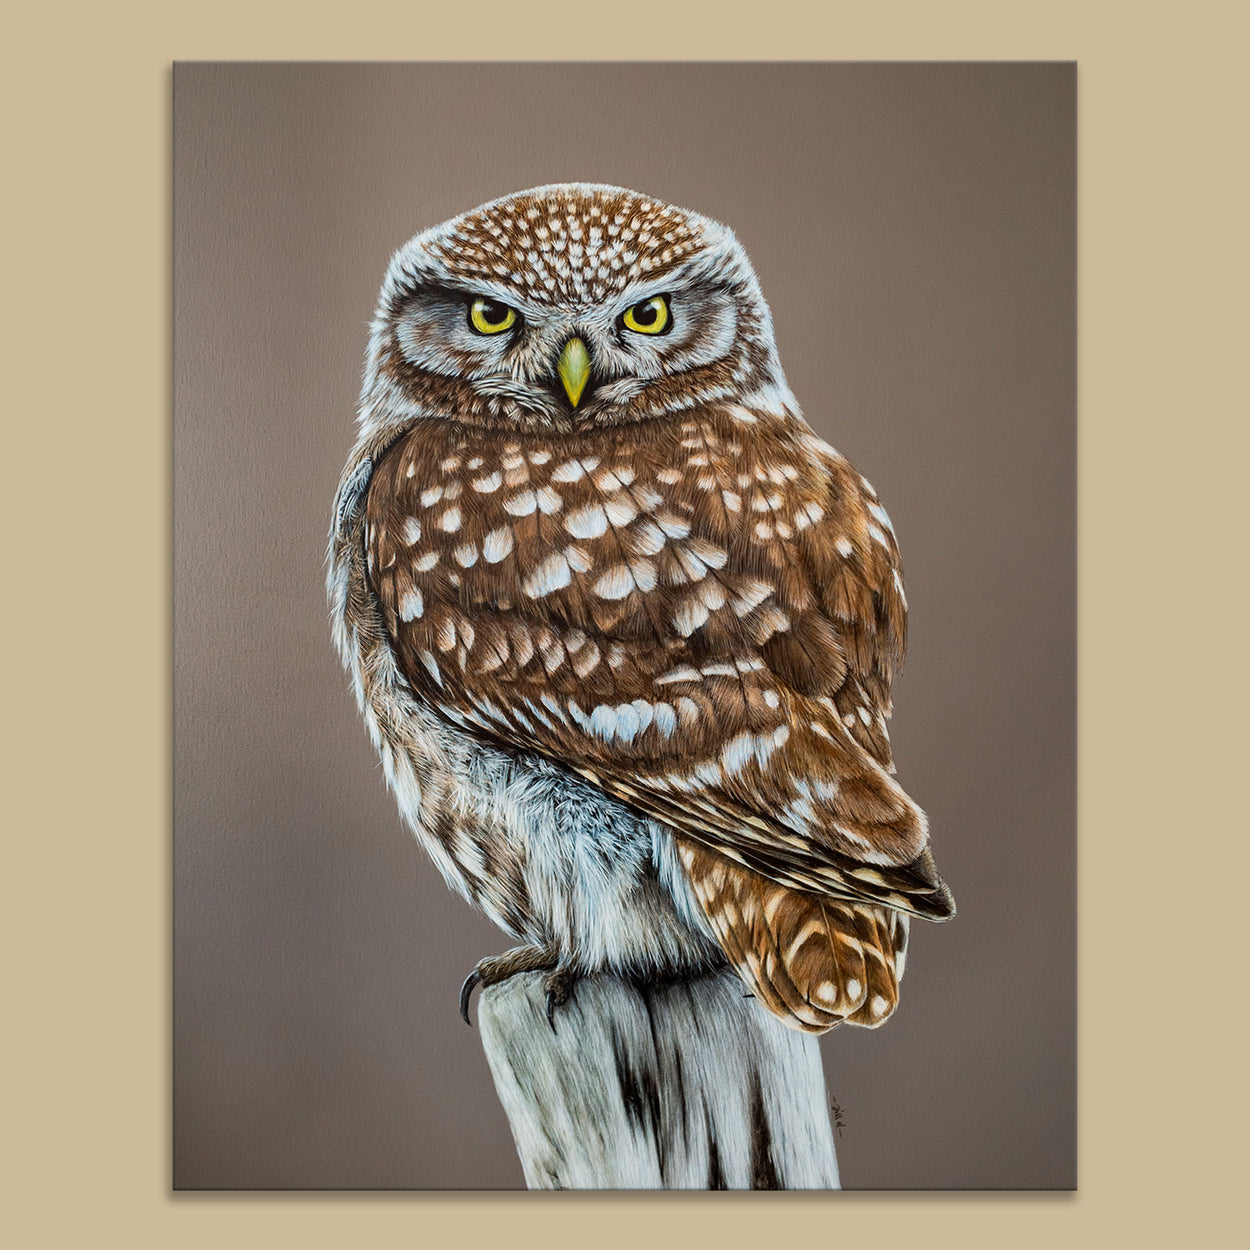 Painting on a canvas of a little owl sitting on a tree stump